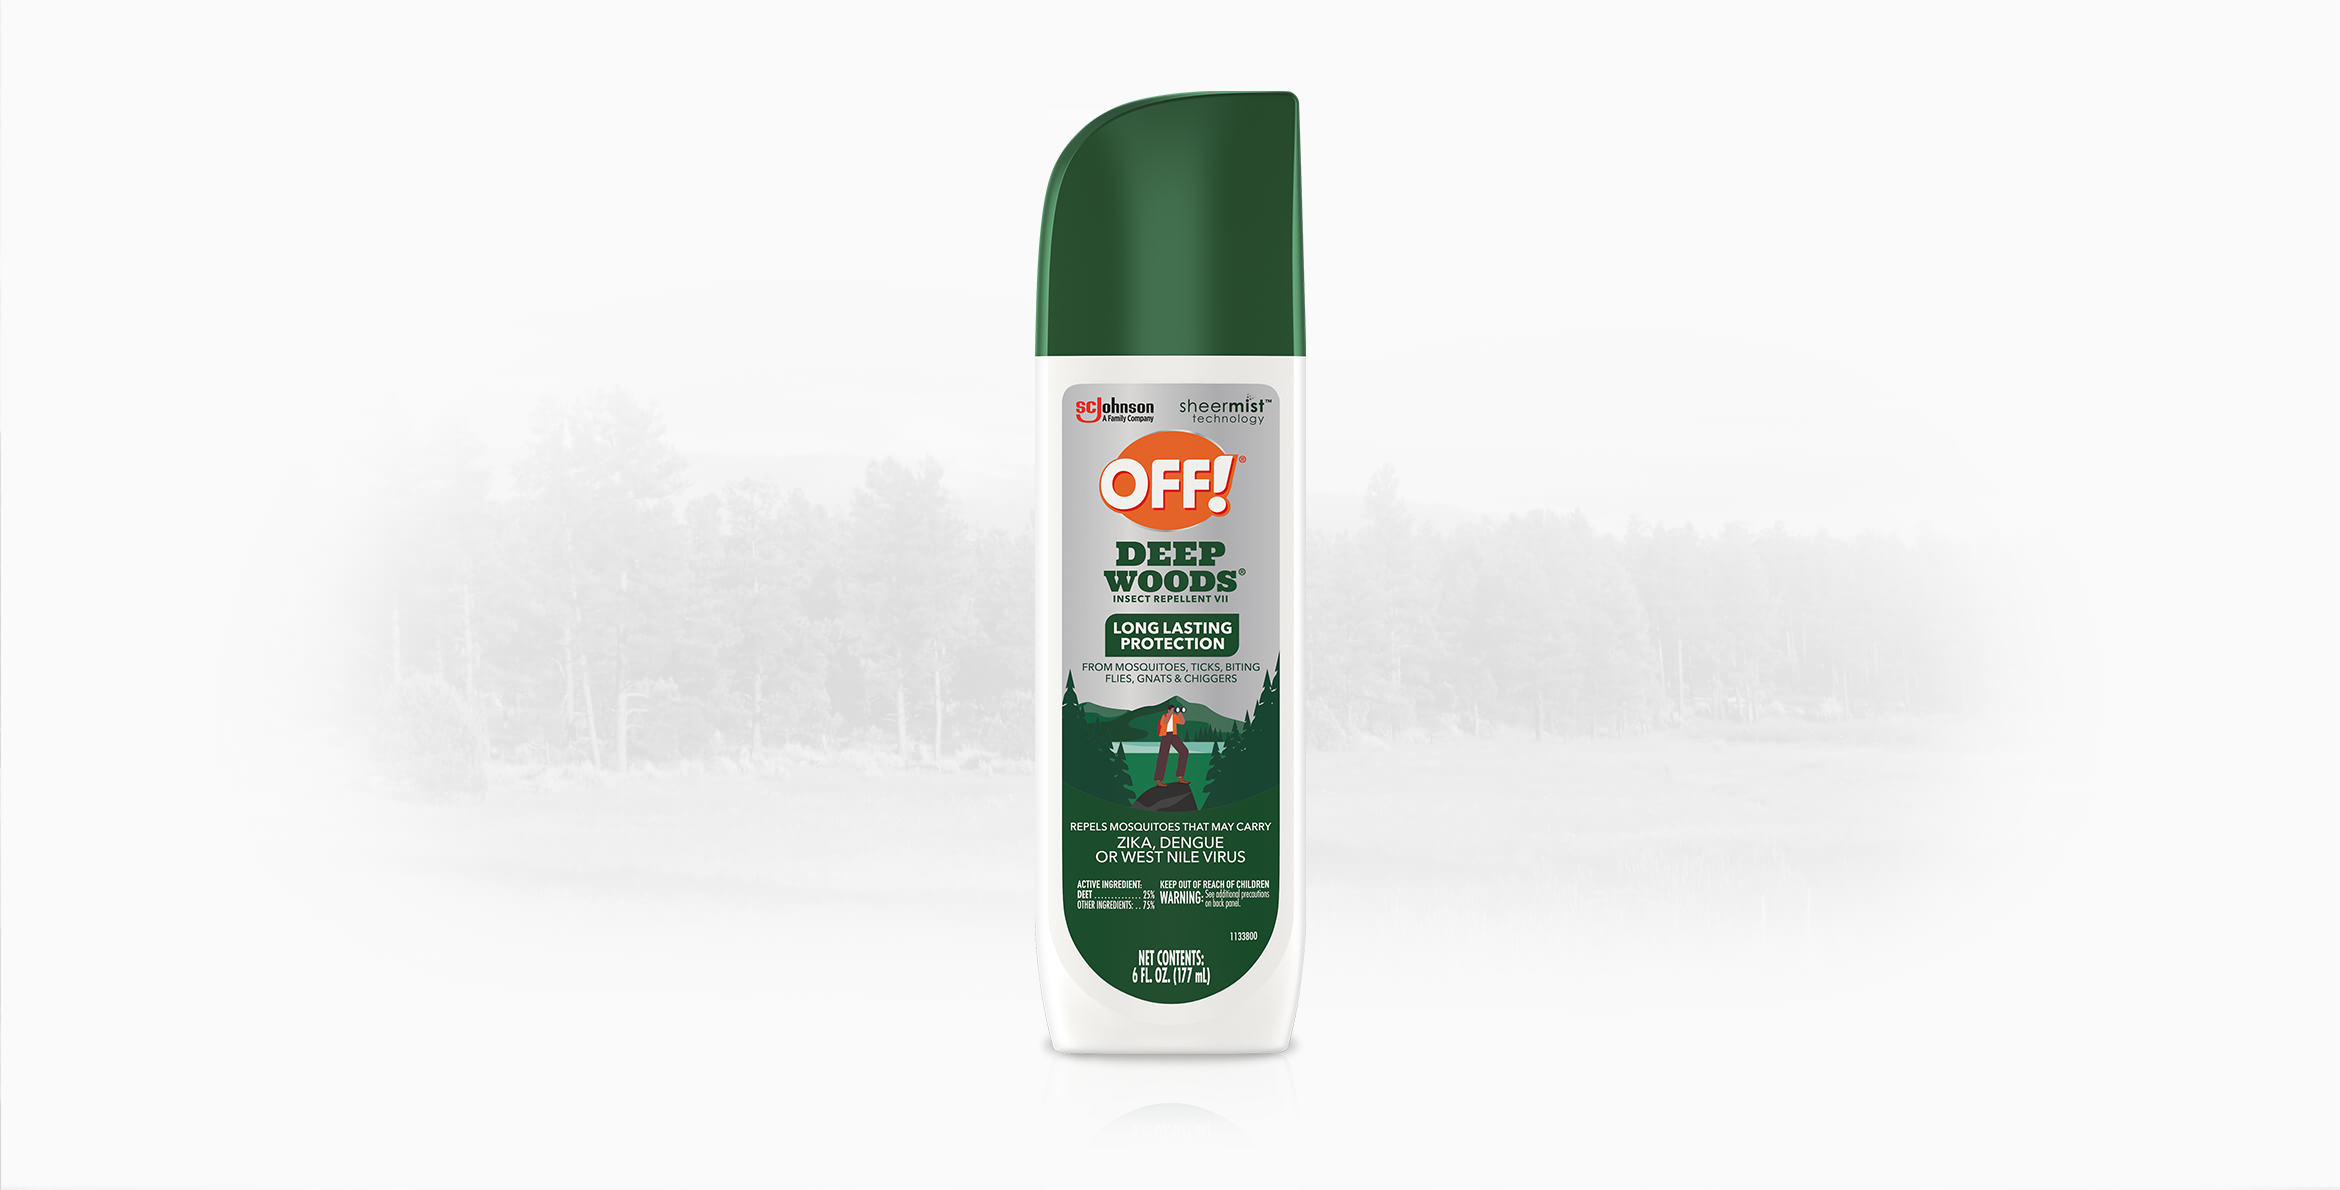 OFF!® Deep Woods® Insect Repellent VII